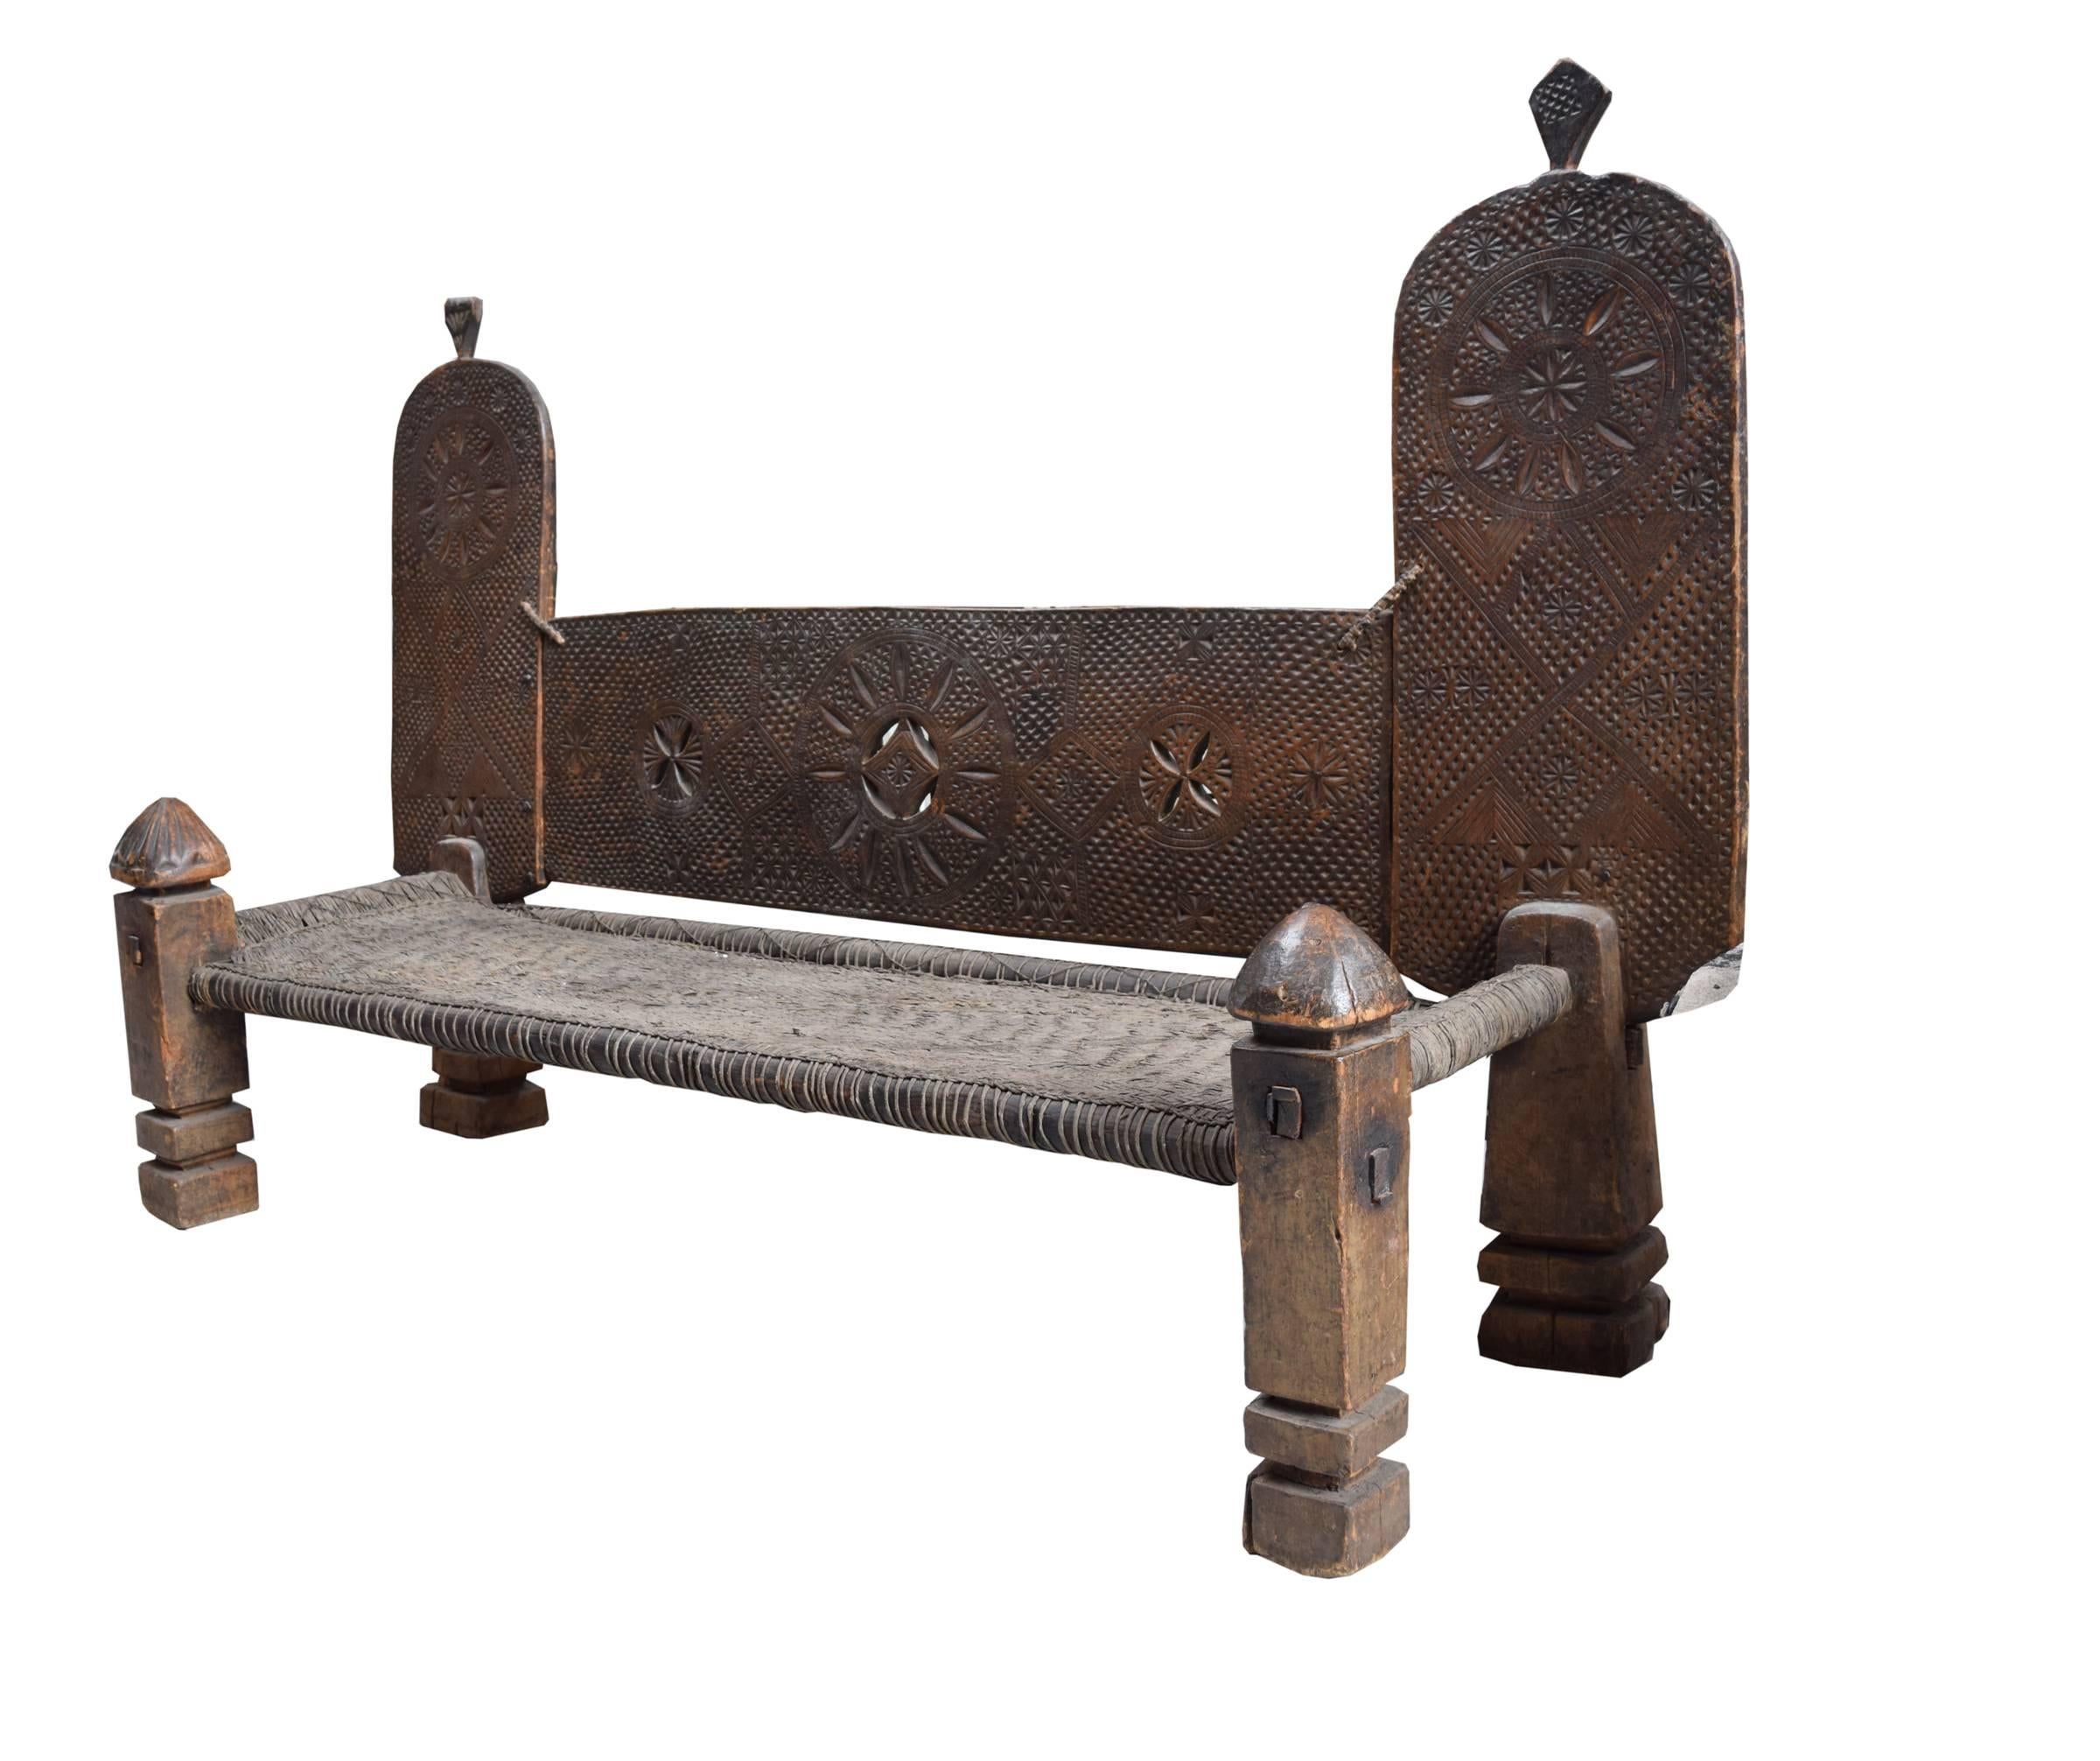 Monumental 19th century Swat Valley bench with chip carved back in geometric patterns, large front legs with carved finials, and a woven hide seat. The largest we have ever seen.
